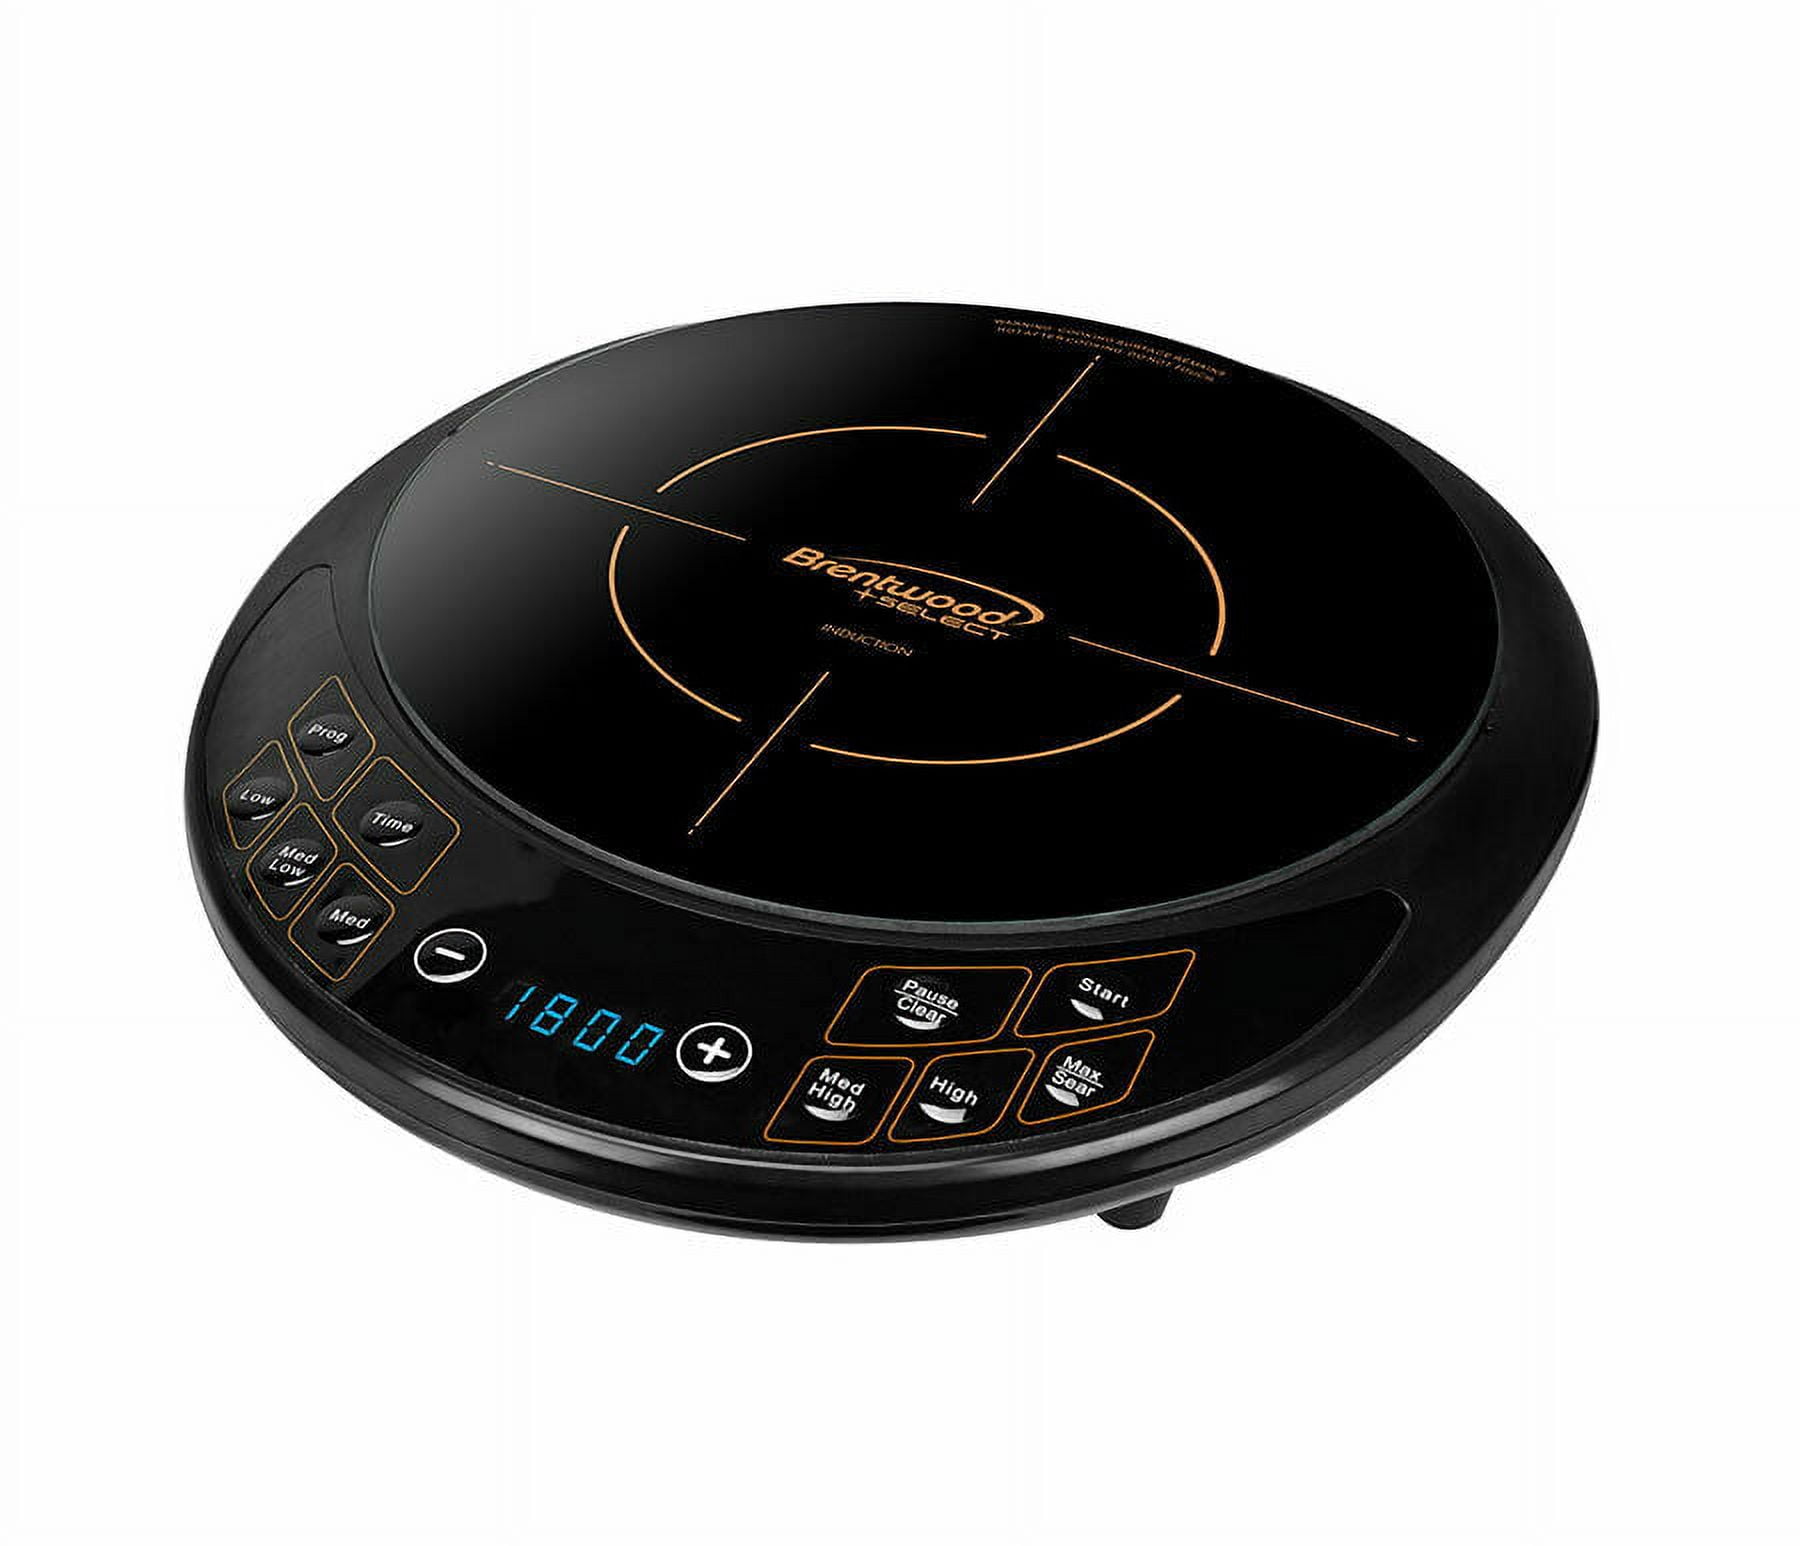 True Induction MD2B 21 Inch Electric Induction Smoothtop Cooktop